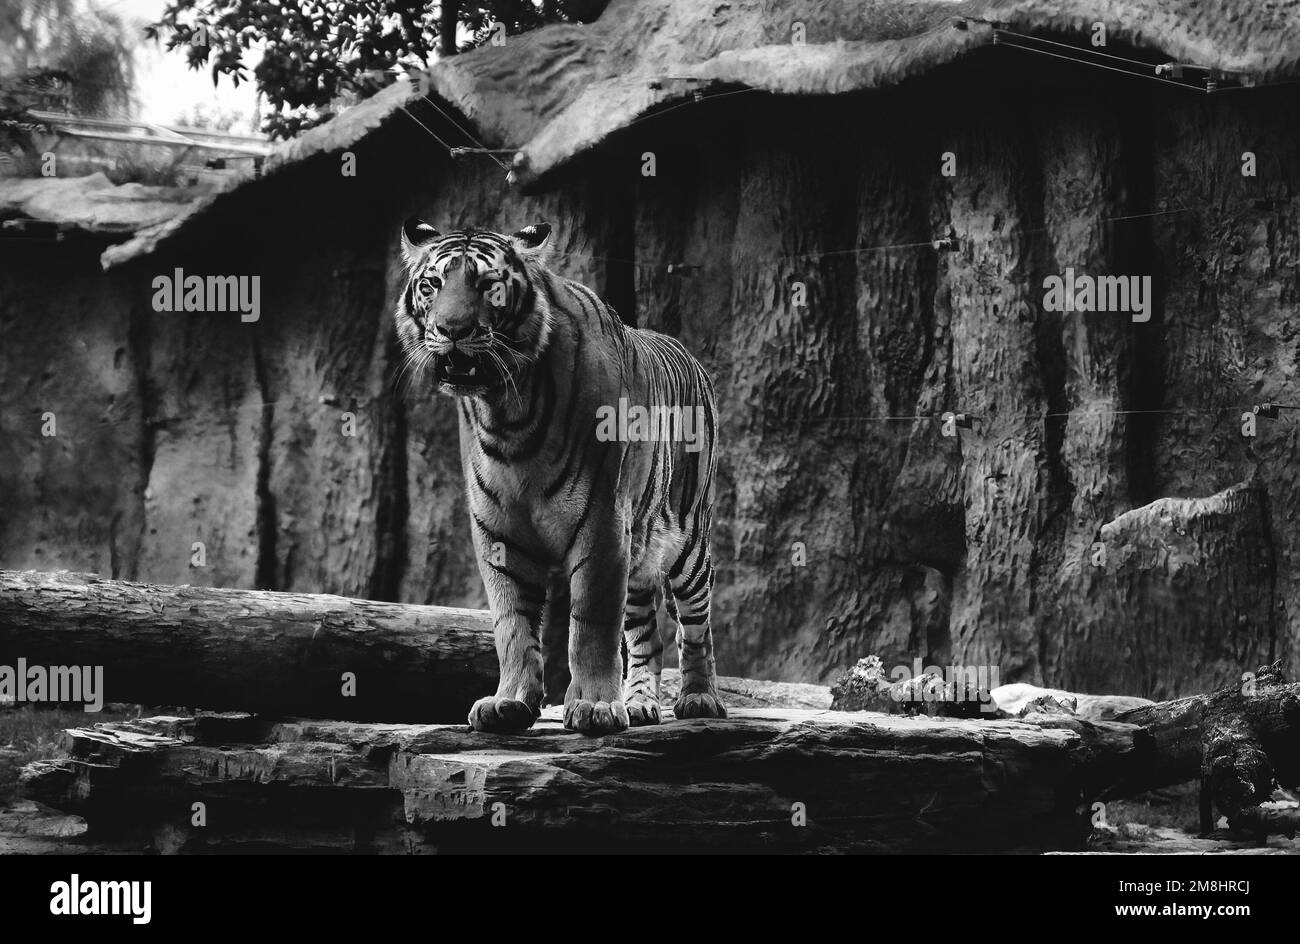 A grayscale of a growling tiger standing on a stone in a wildlife preserve Stock Photo